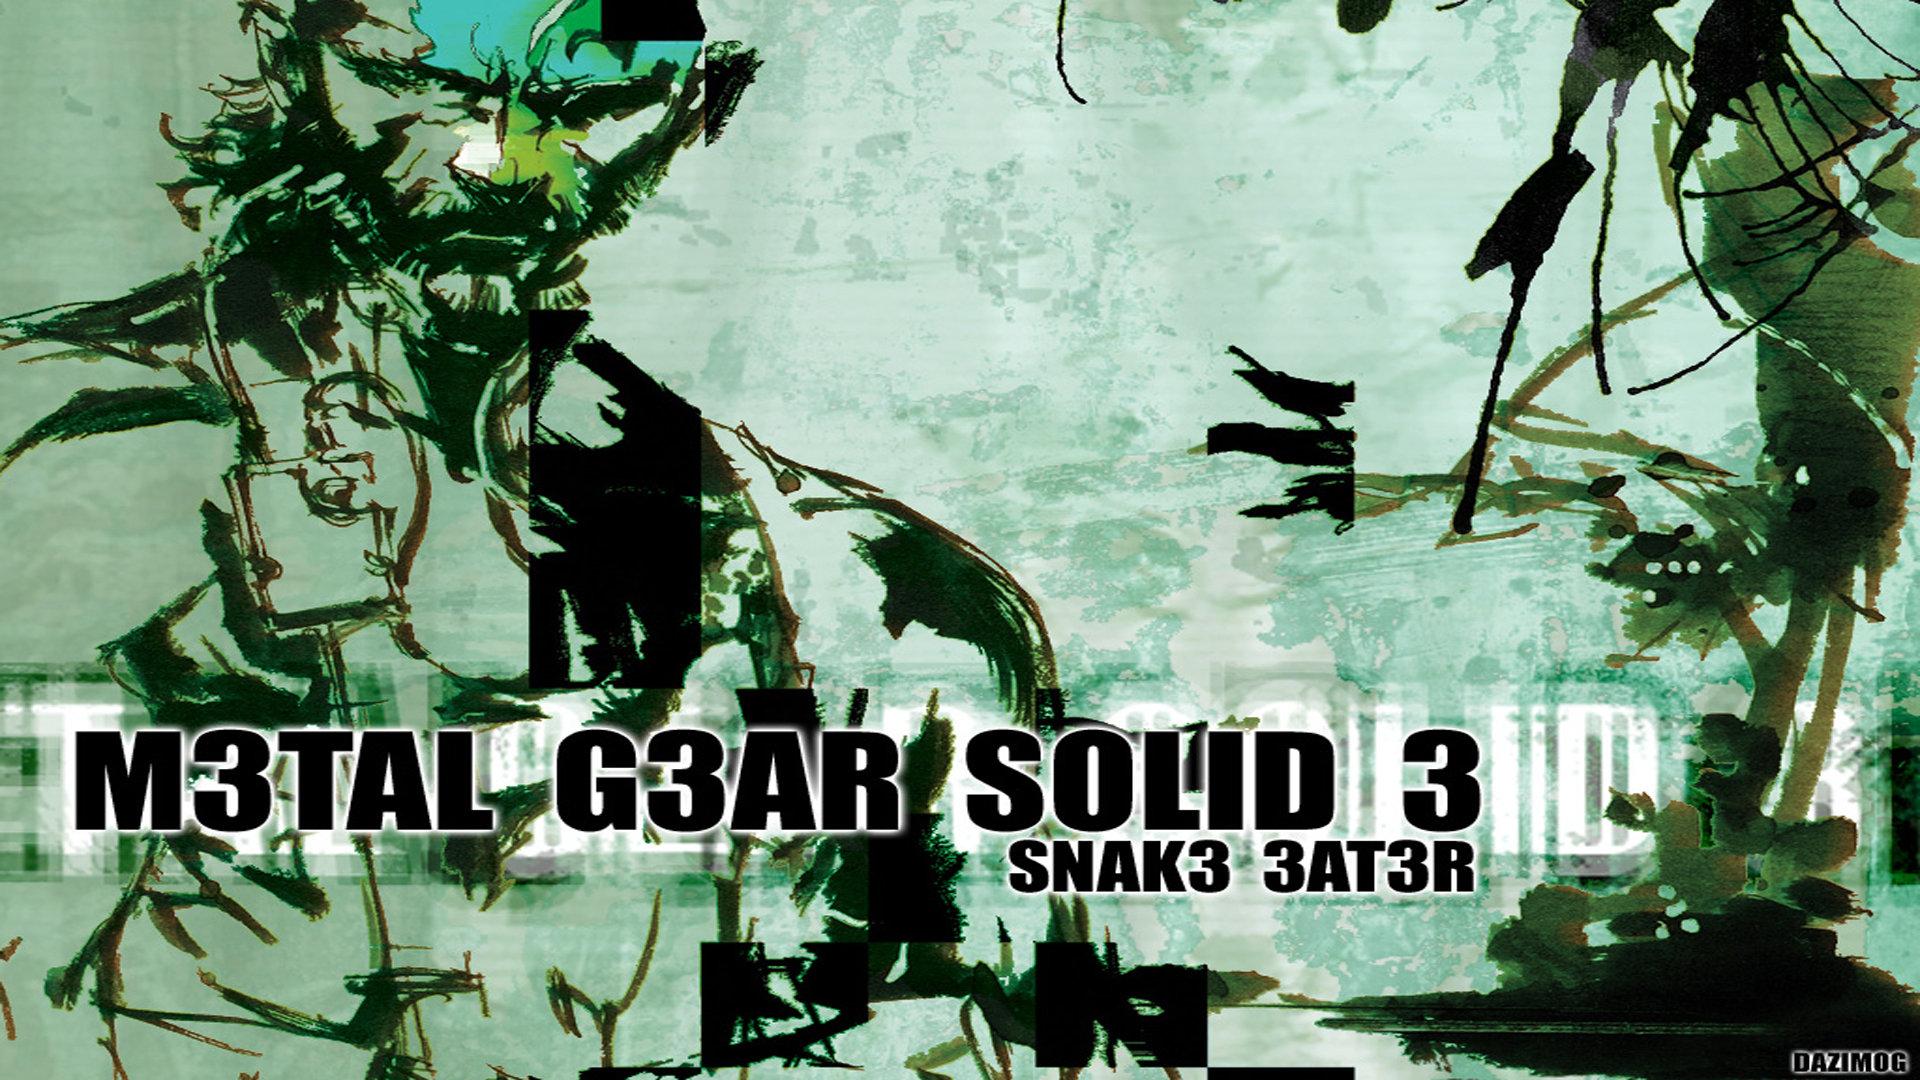 Download full HD 1920x1080 Metal Gear Solid 3: Snake Eater MGS 3